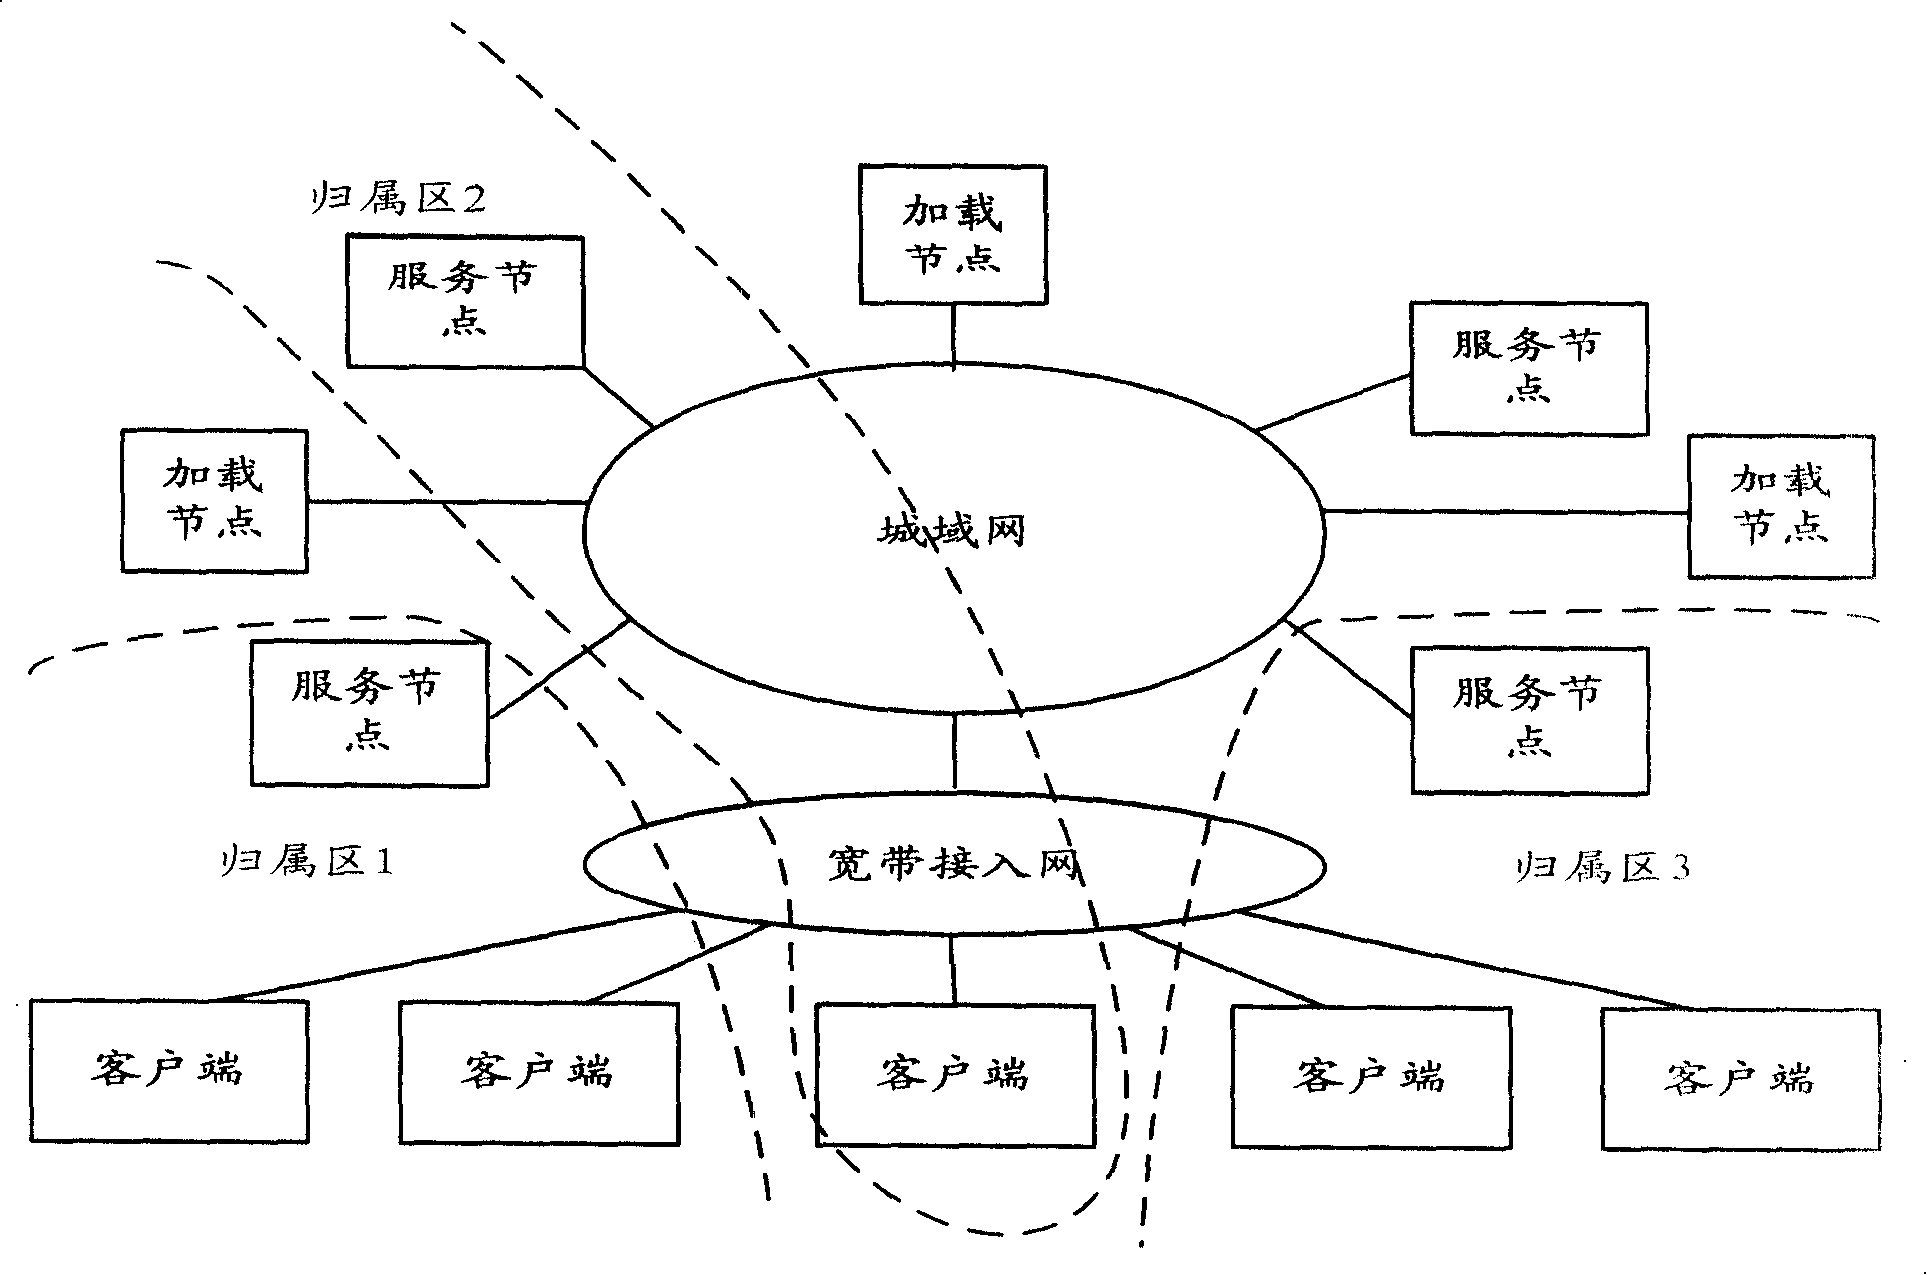 A video content service system and service method